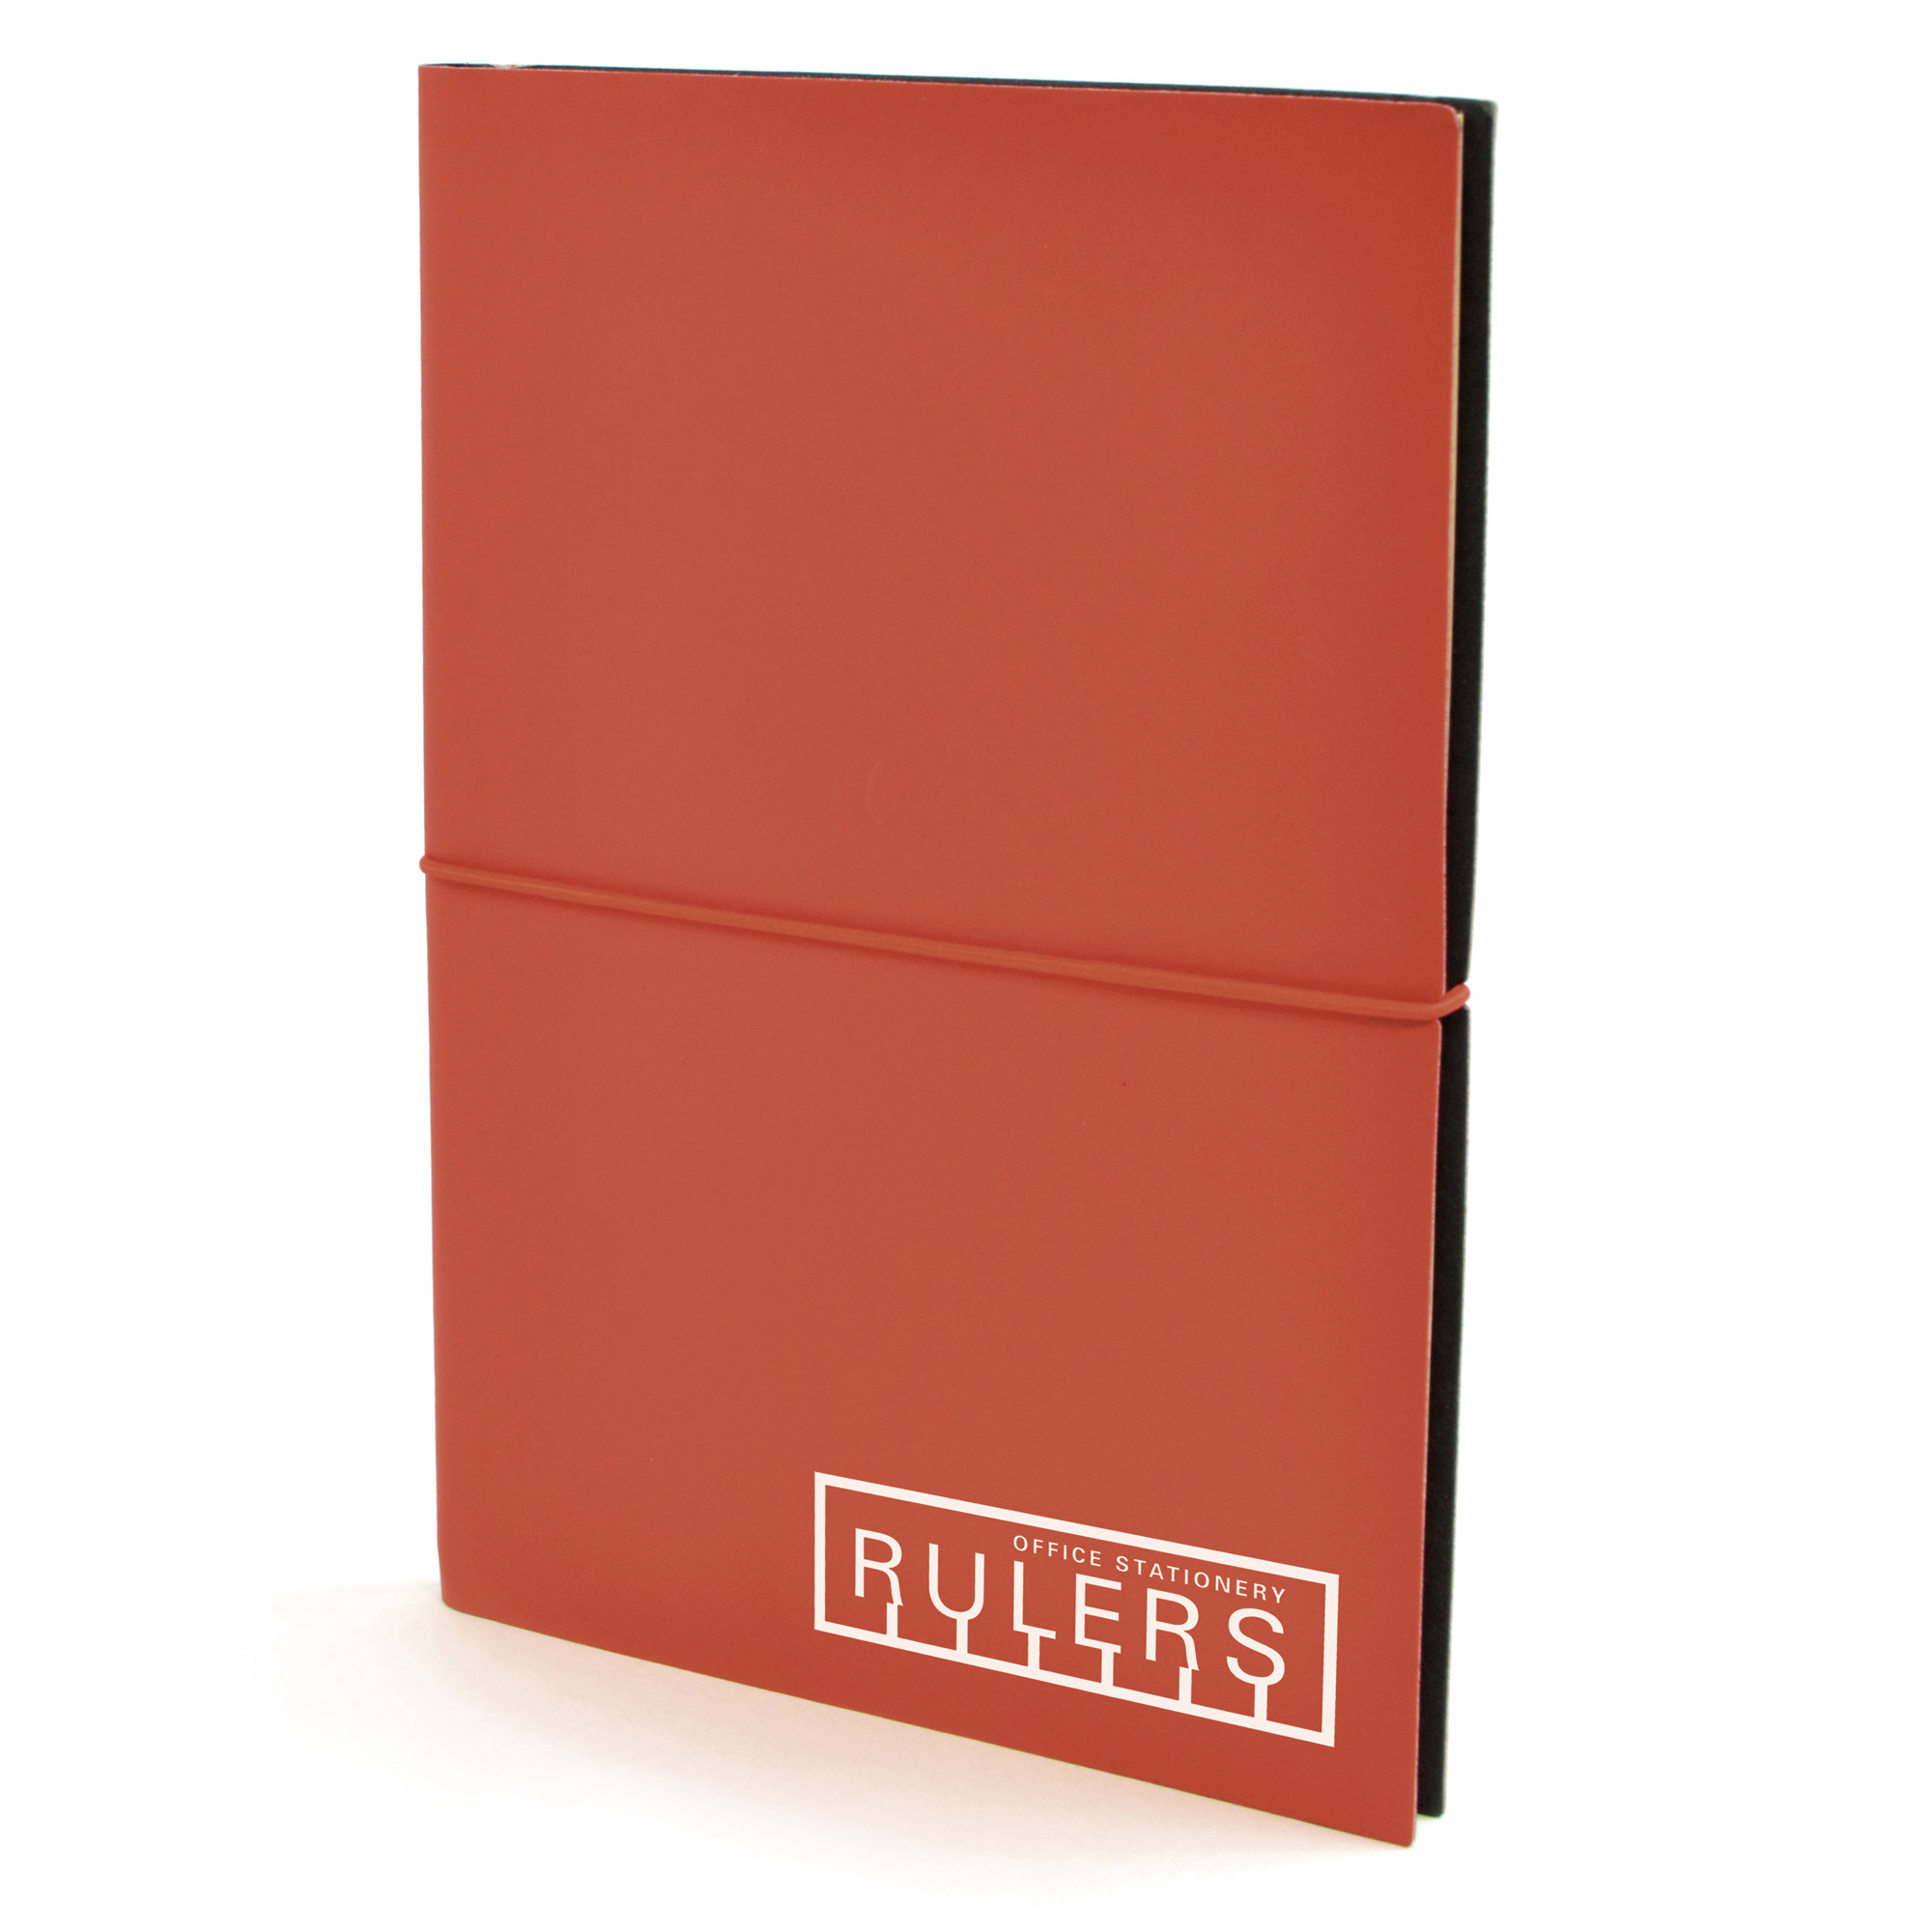 A5 PU notebook with elastic close around the middle. Notebook contains 80 lined 70gsm sheets.